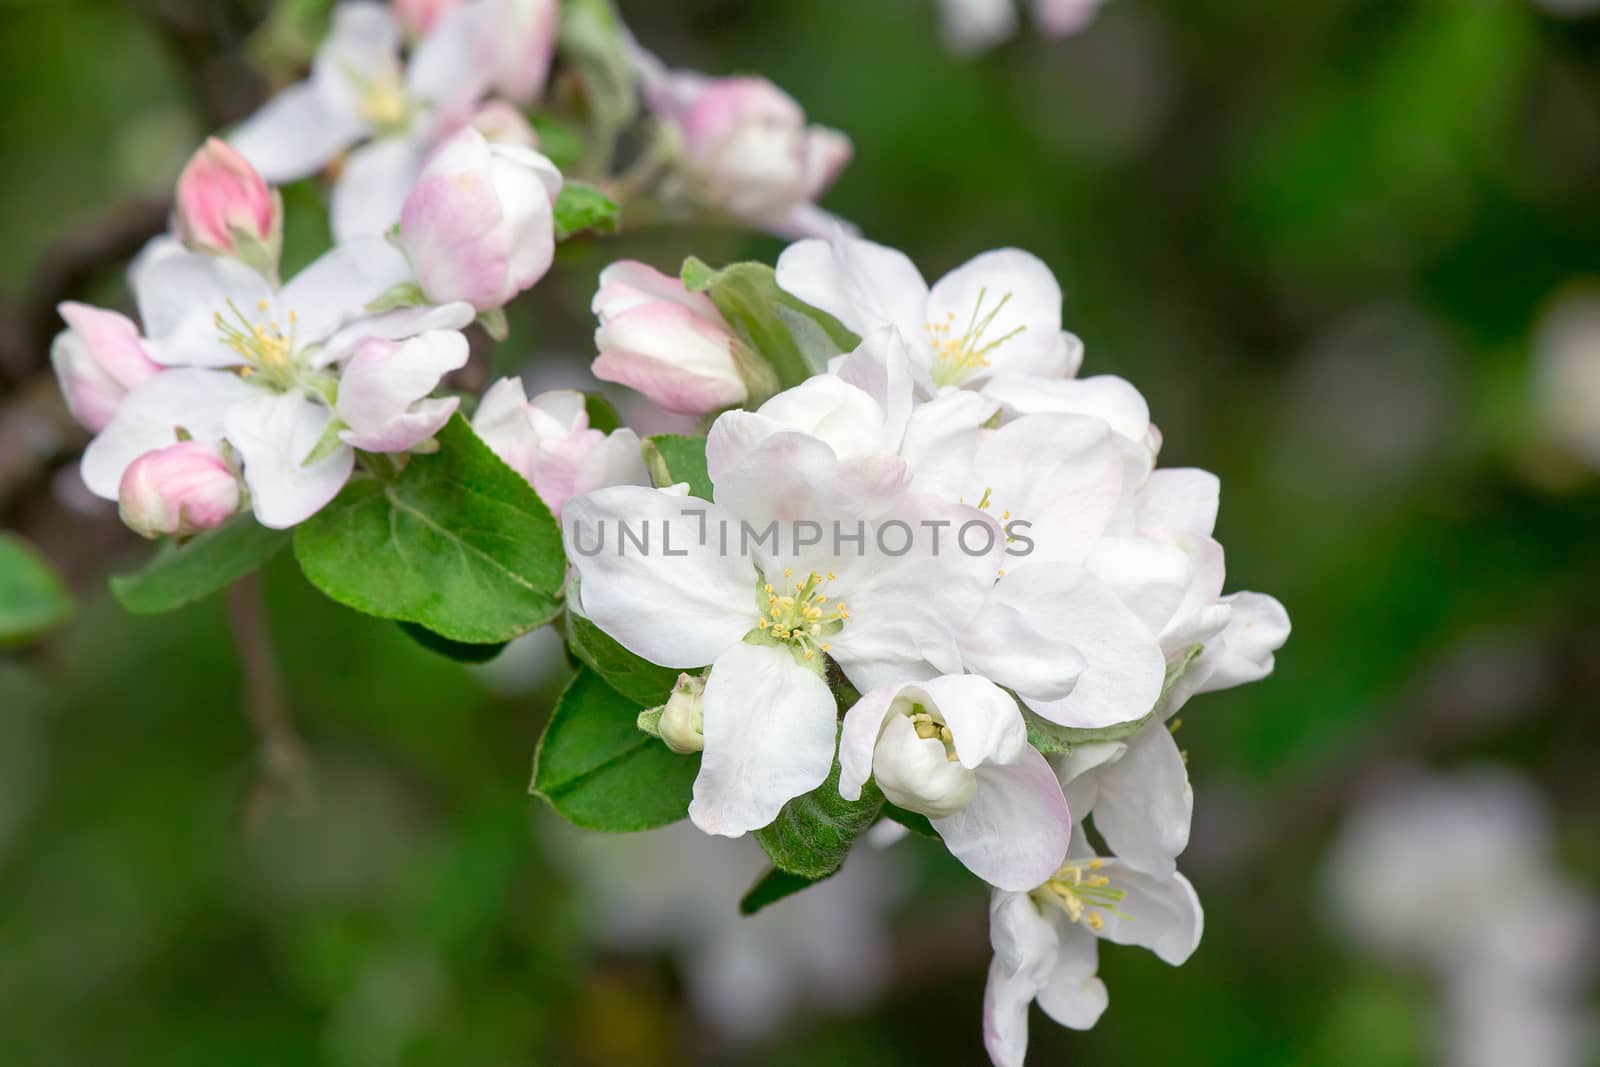 Branch of apple-tree with plenty of white-pink colors and buds in a green garden in spring.